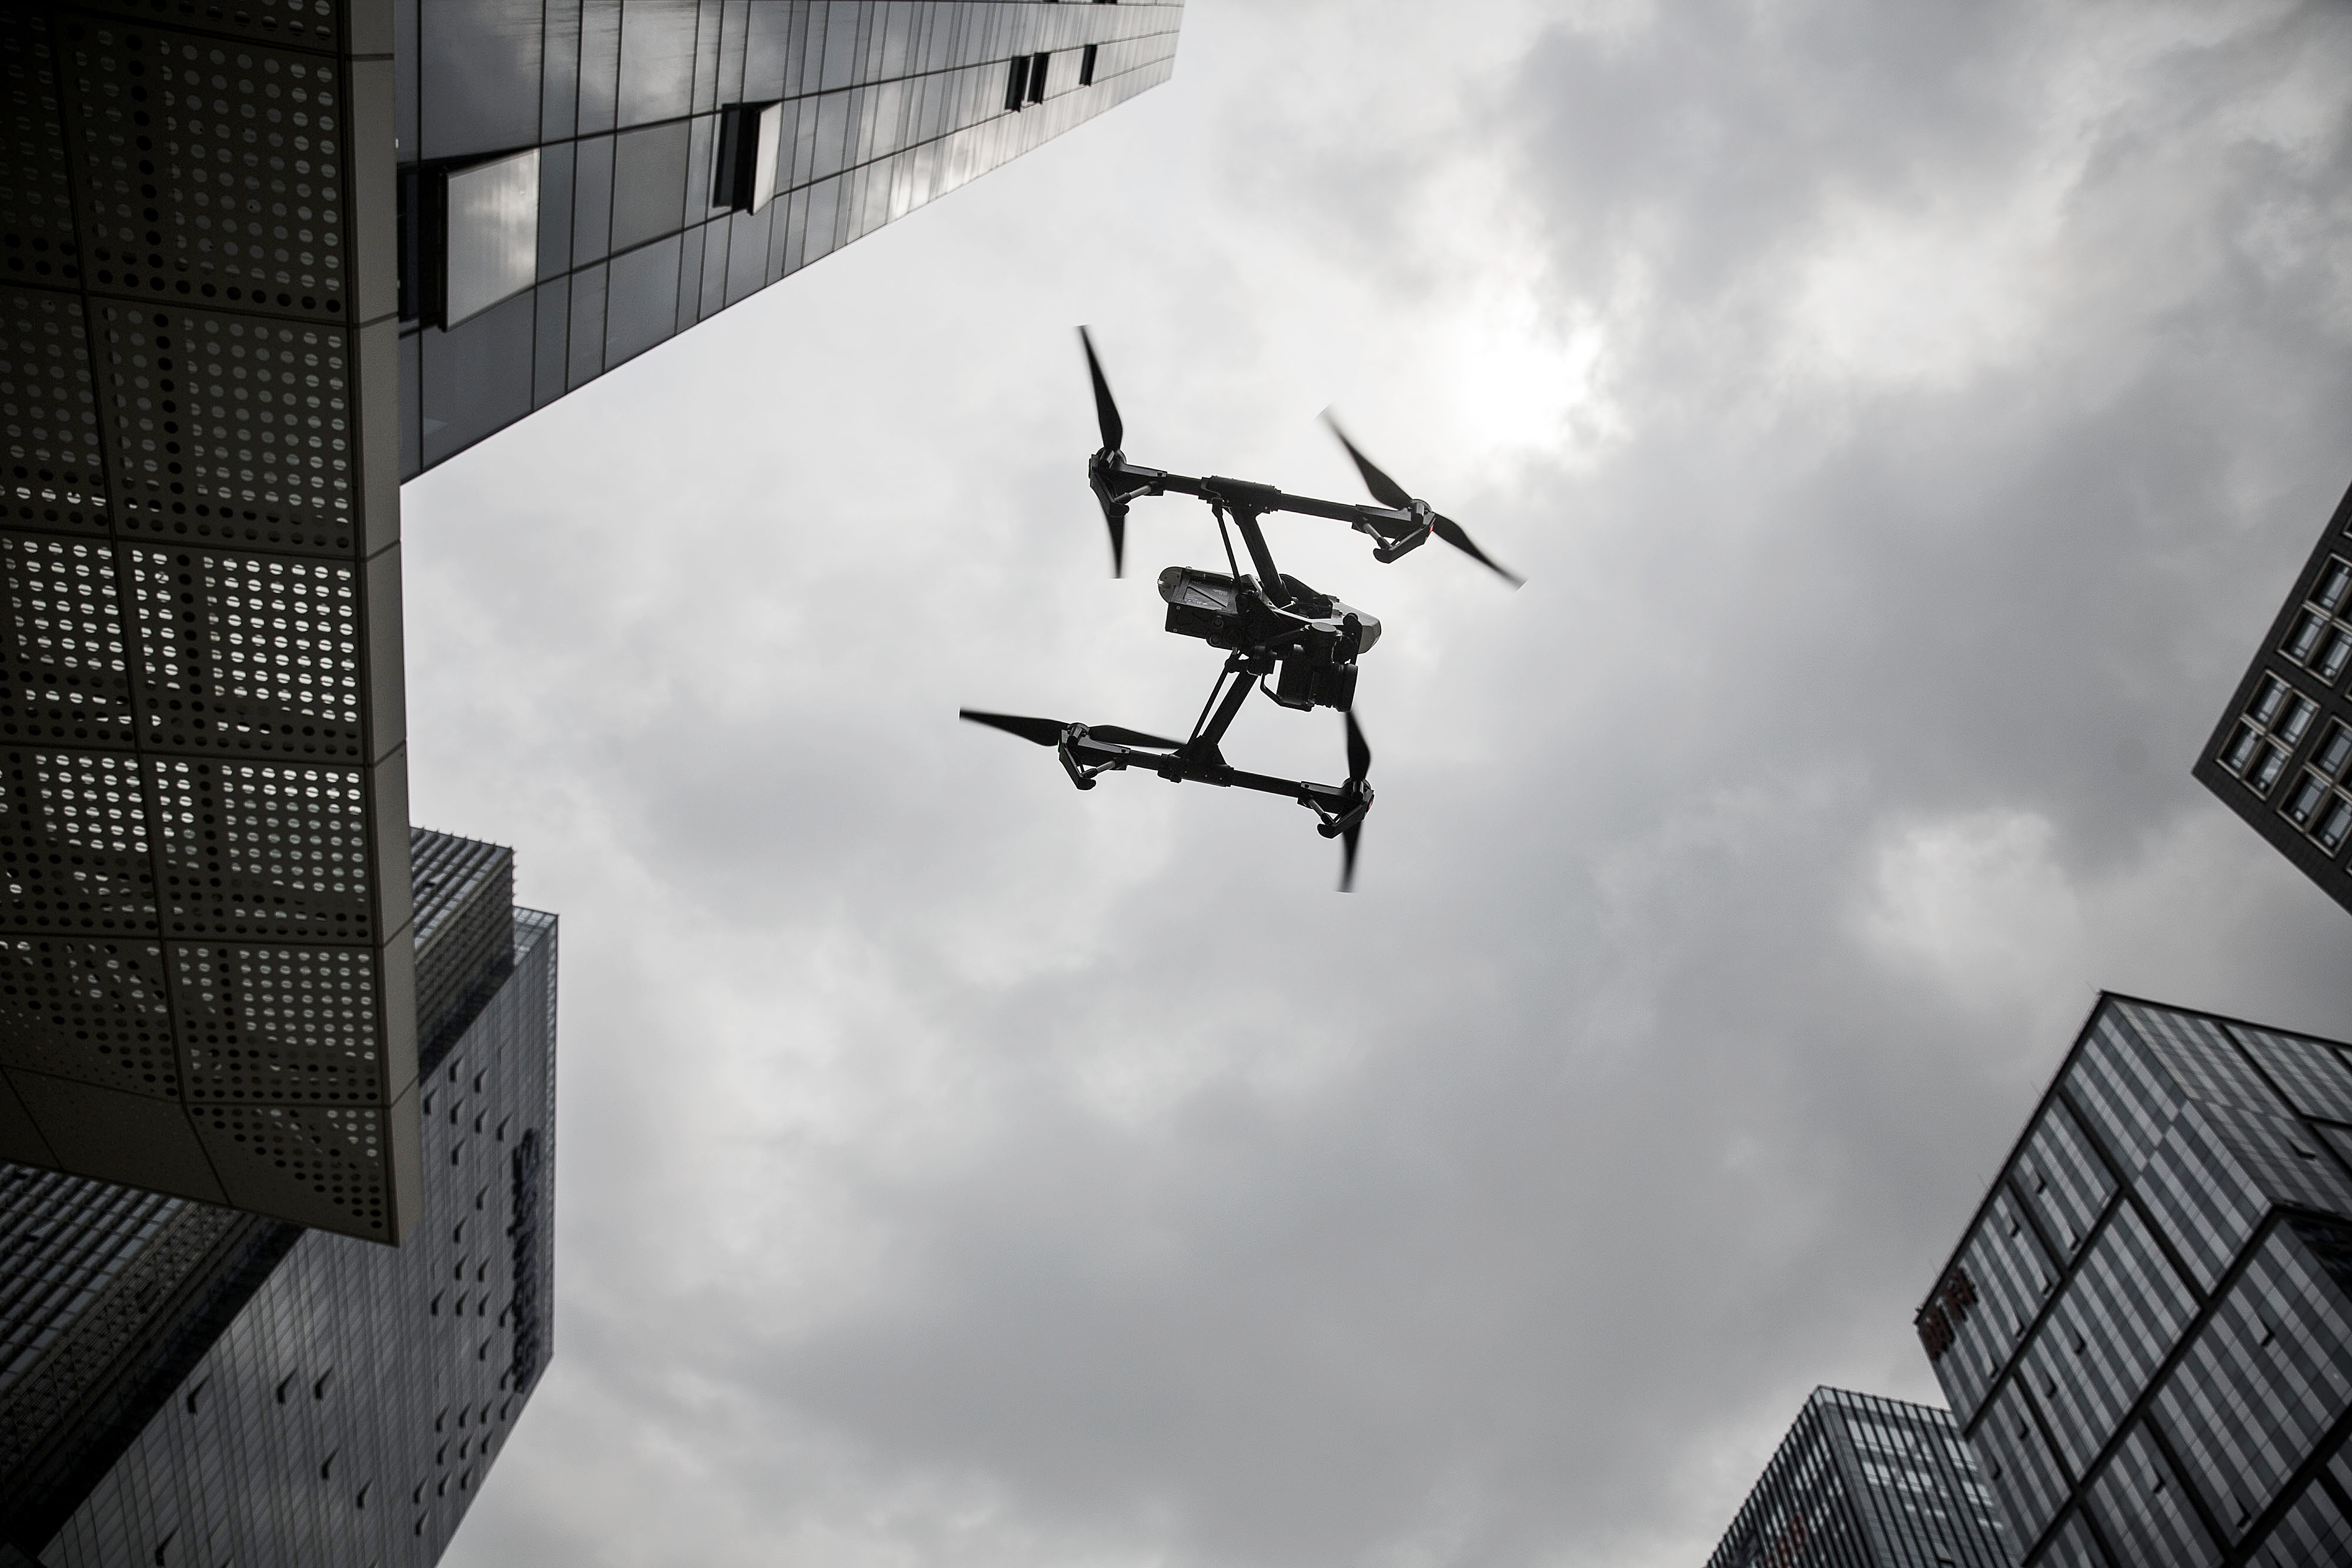 A DJI Inspire 1 Pro drone is flown during a demonstration at the SZ DJI Technology Co. headquarters in Shenzhen, China, April 20, 2016 (Bloomberg/Getty Images)